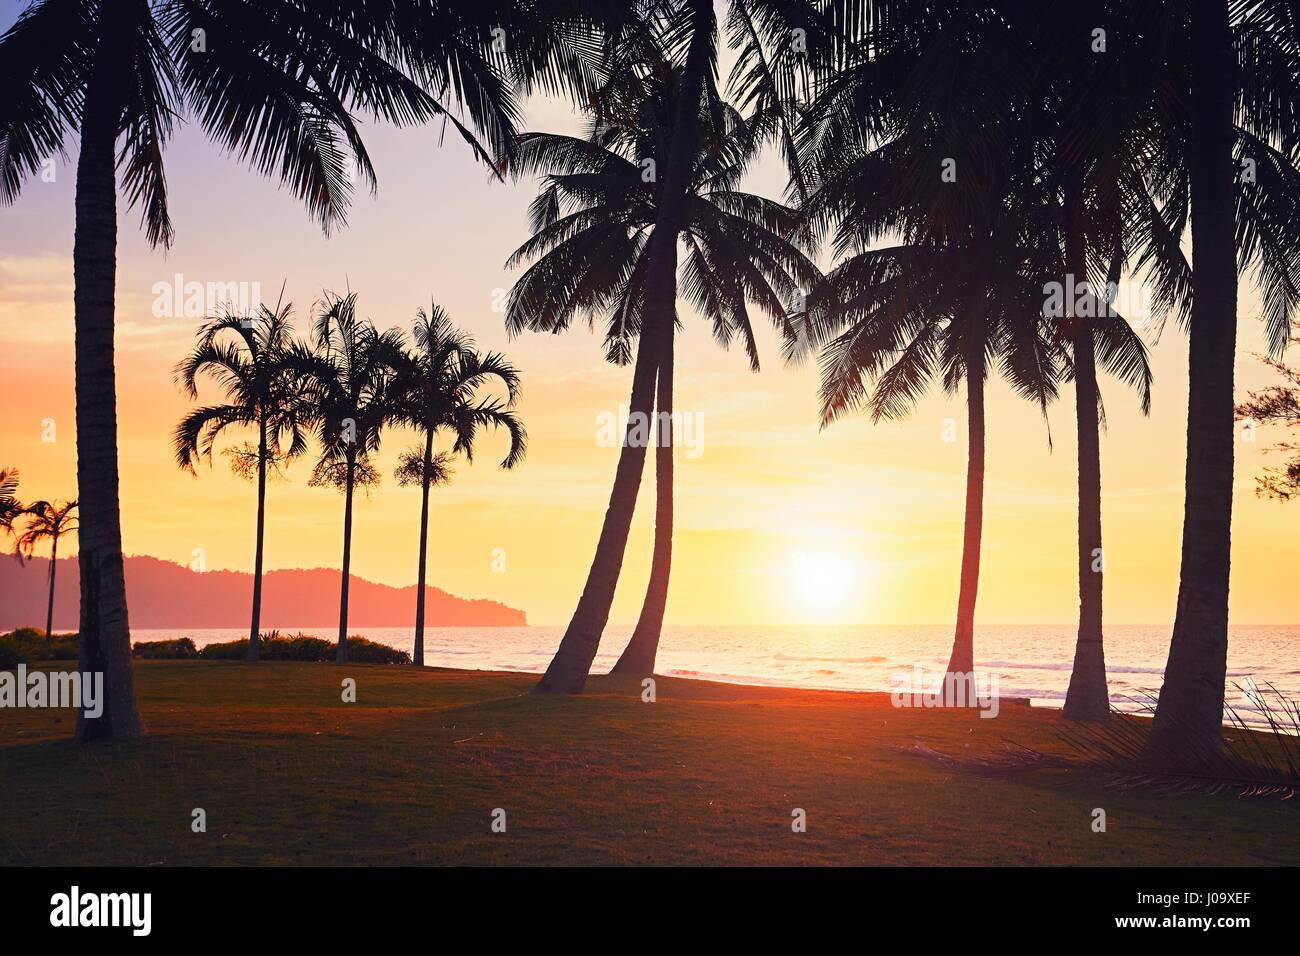 Silhouette of the palm trees on the beach at the amazing sunset. Summer vacation and  travel concept. Island of Borneo, Malaysia. Stock Photo